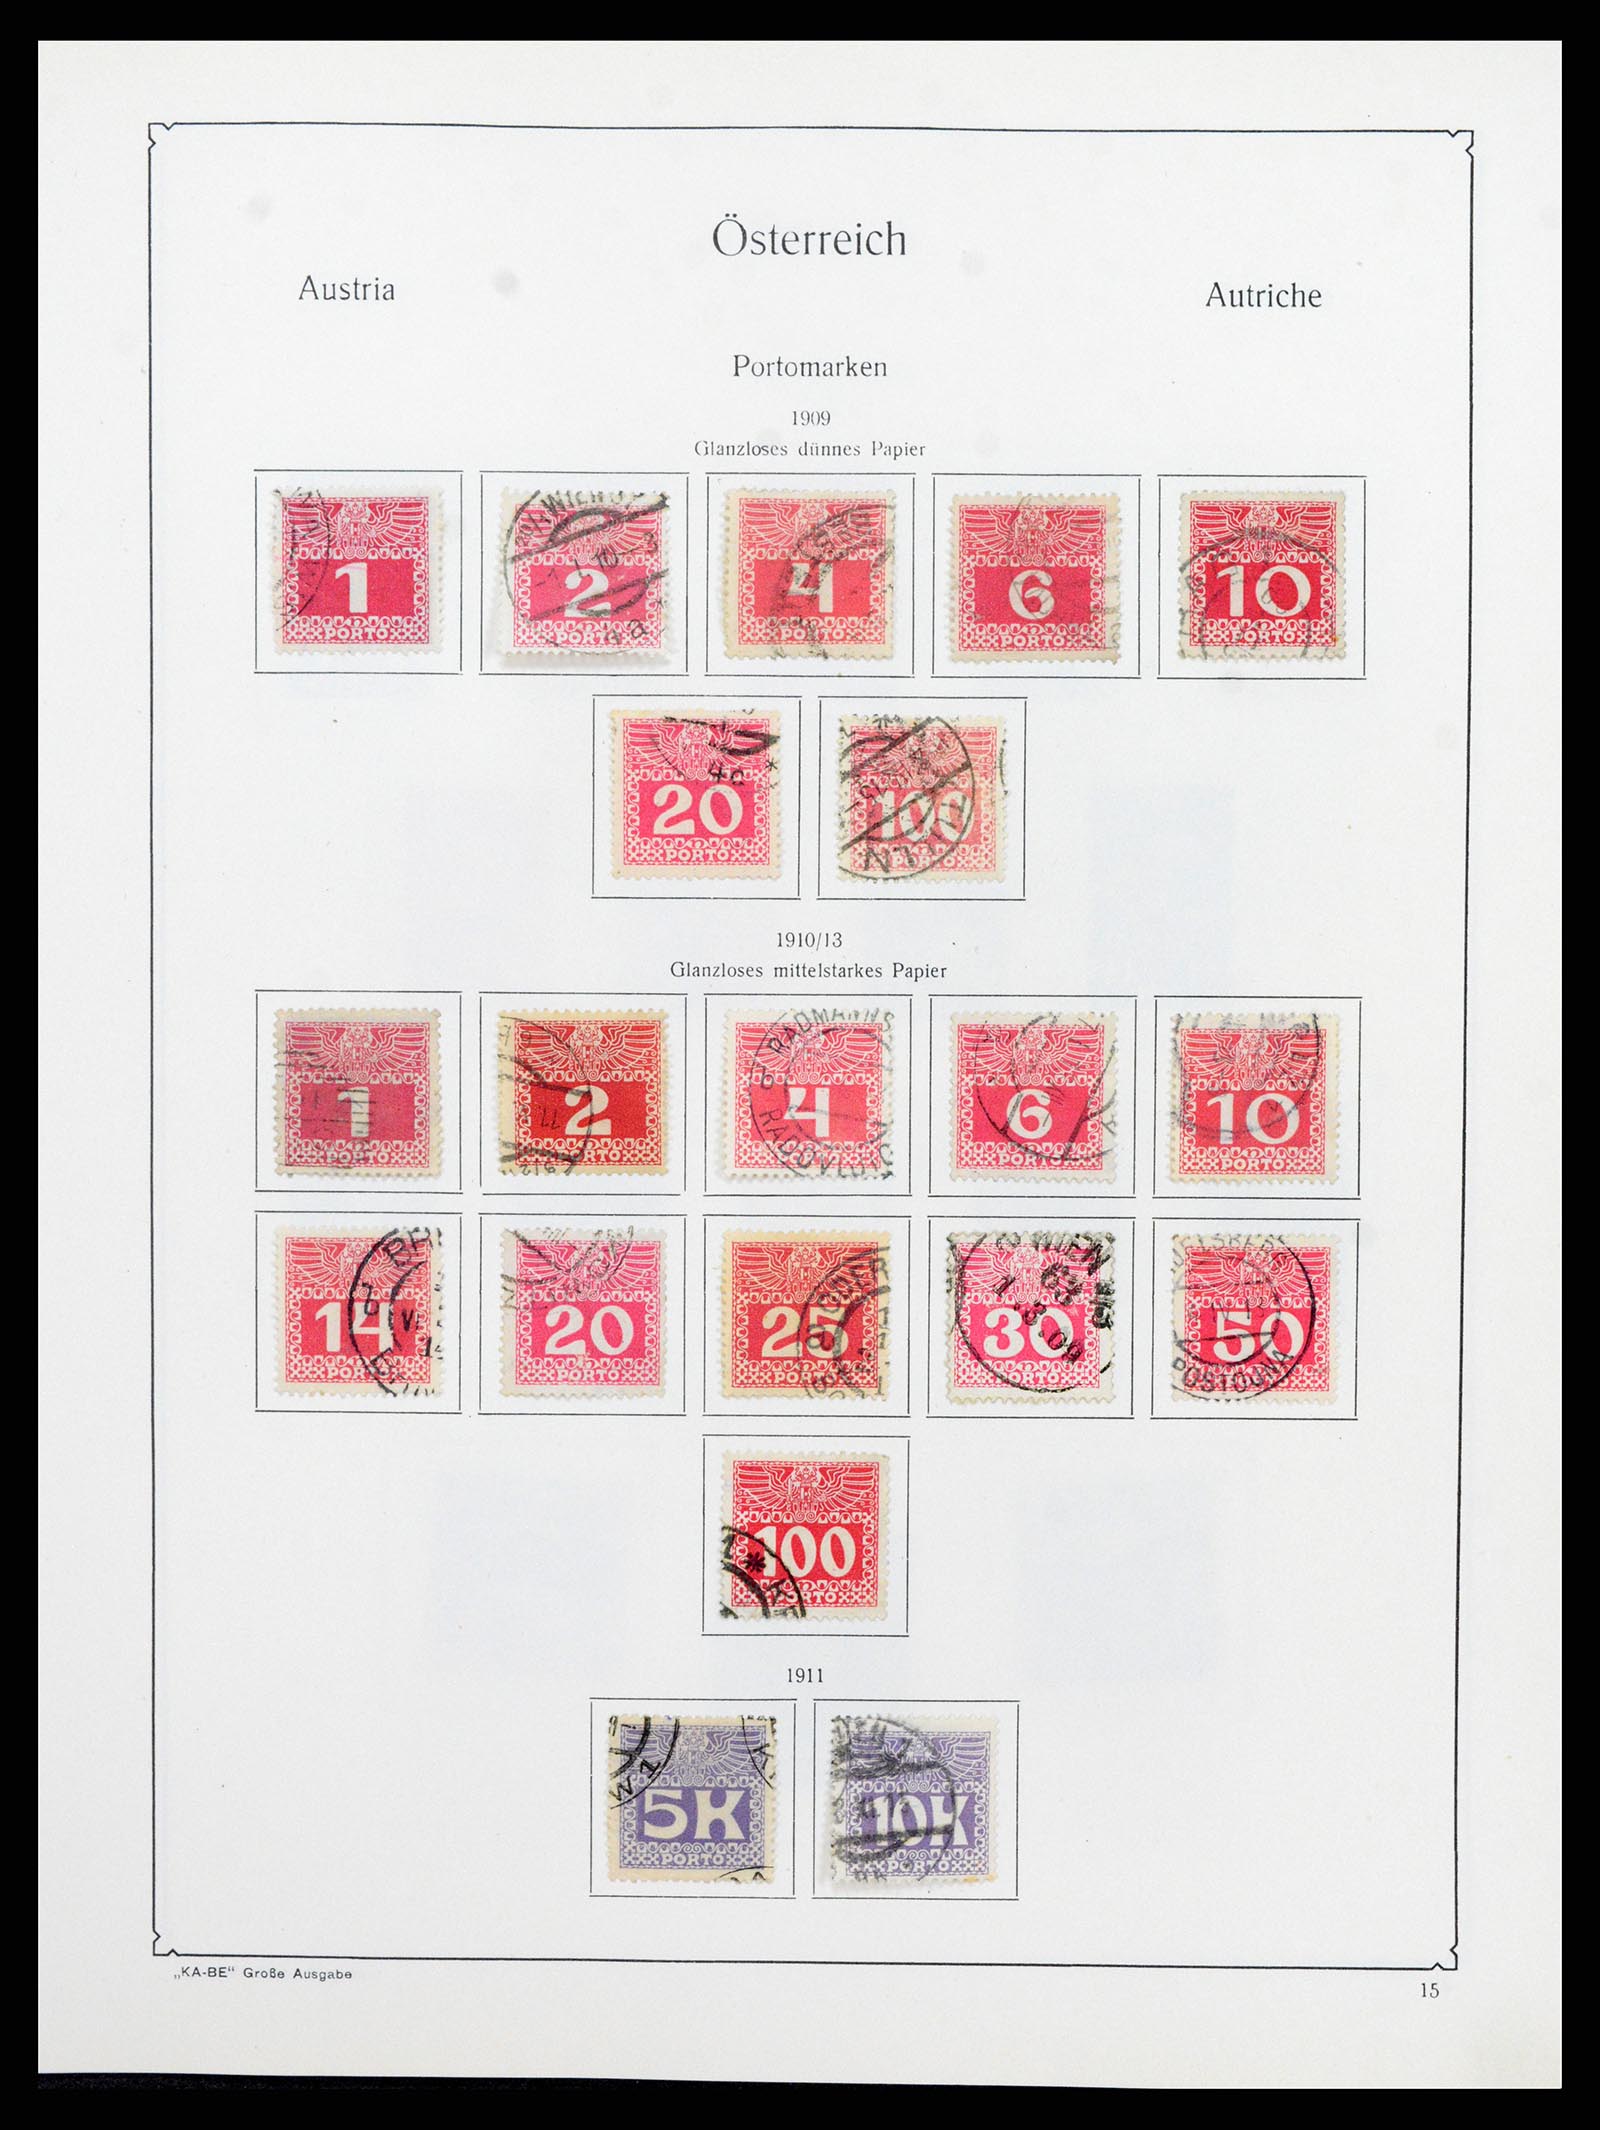 37960 020 - Stamp collection 37960 Austria and territories 1850-1984.